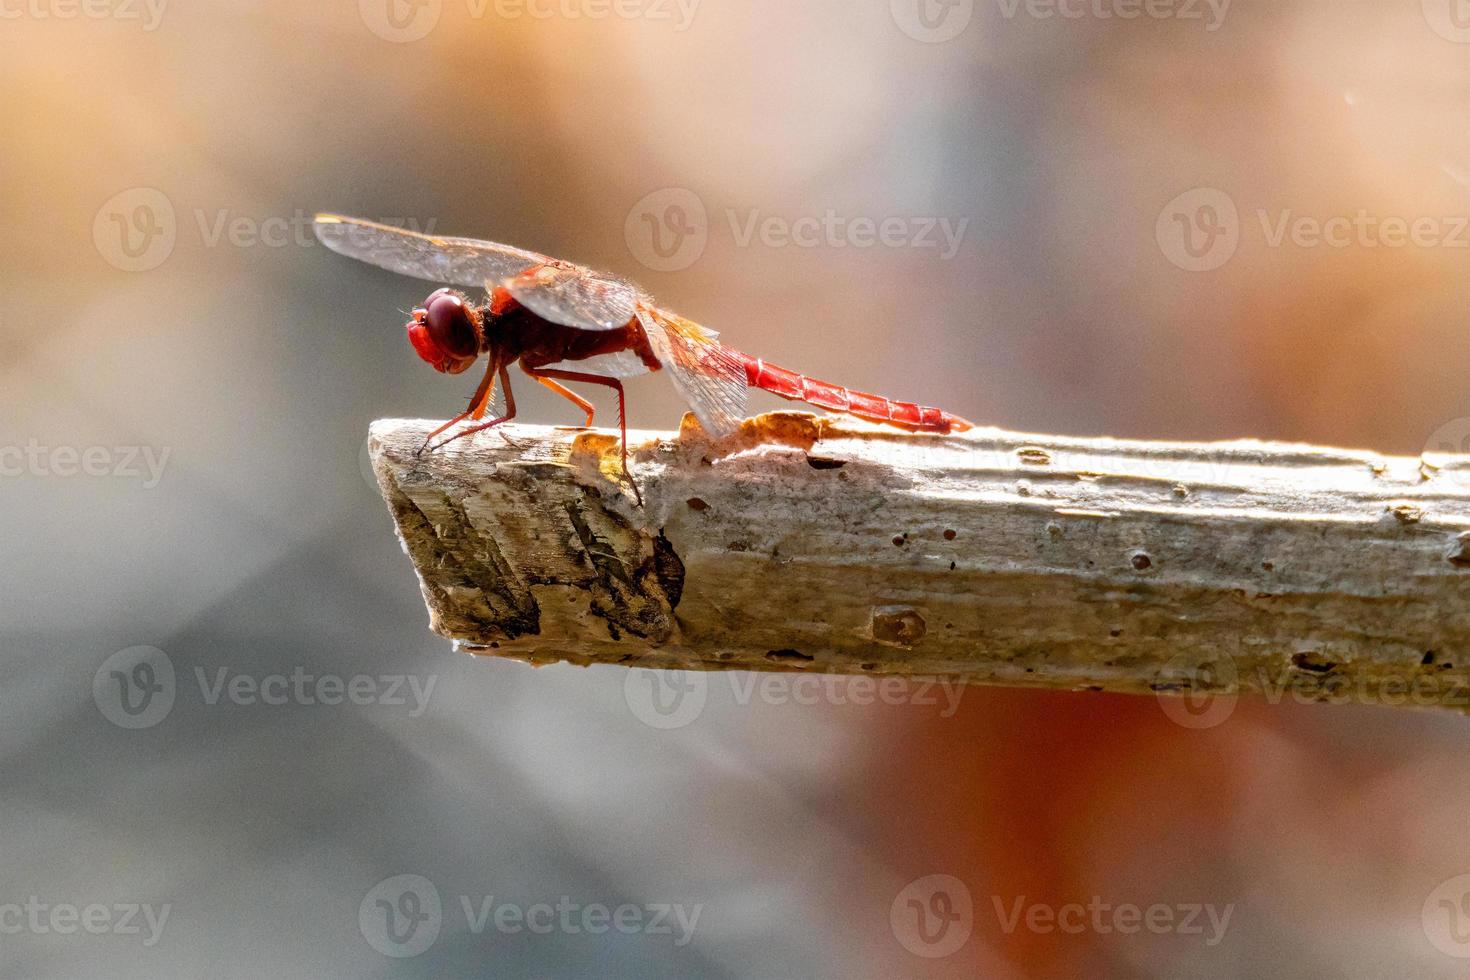 Cardinal Venerossa dragonfly perched on a branch photo